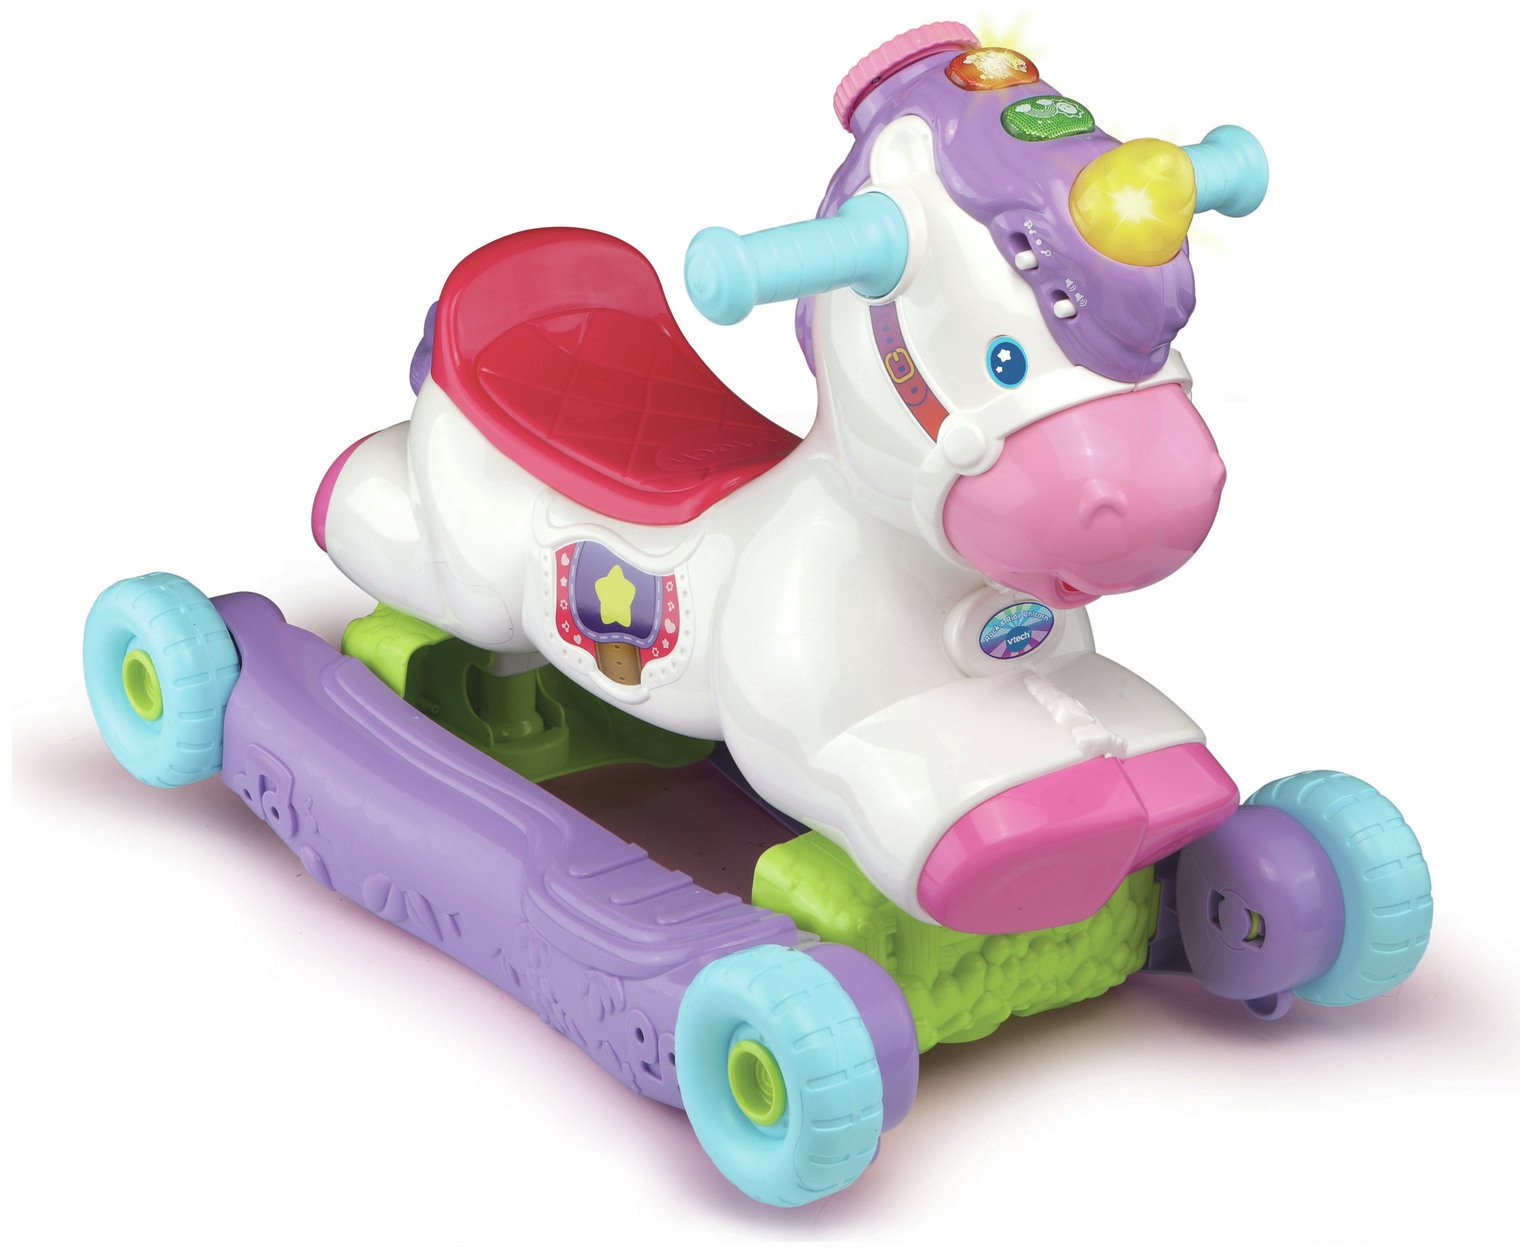 VTech Rock and Ride Unicorn Review